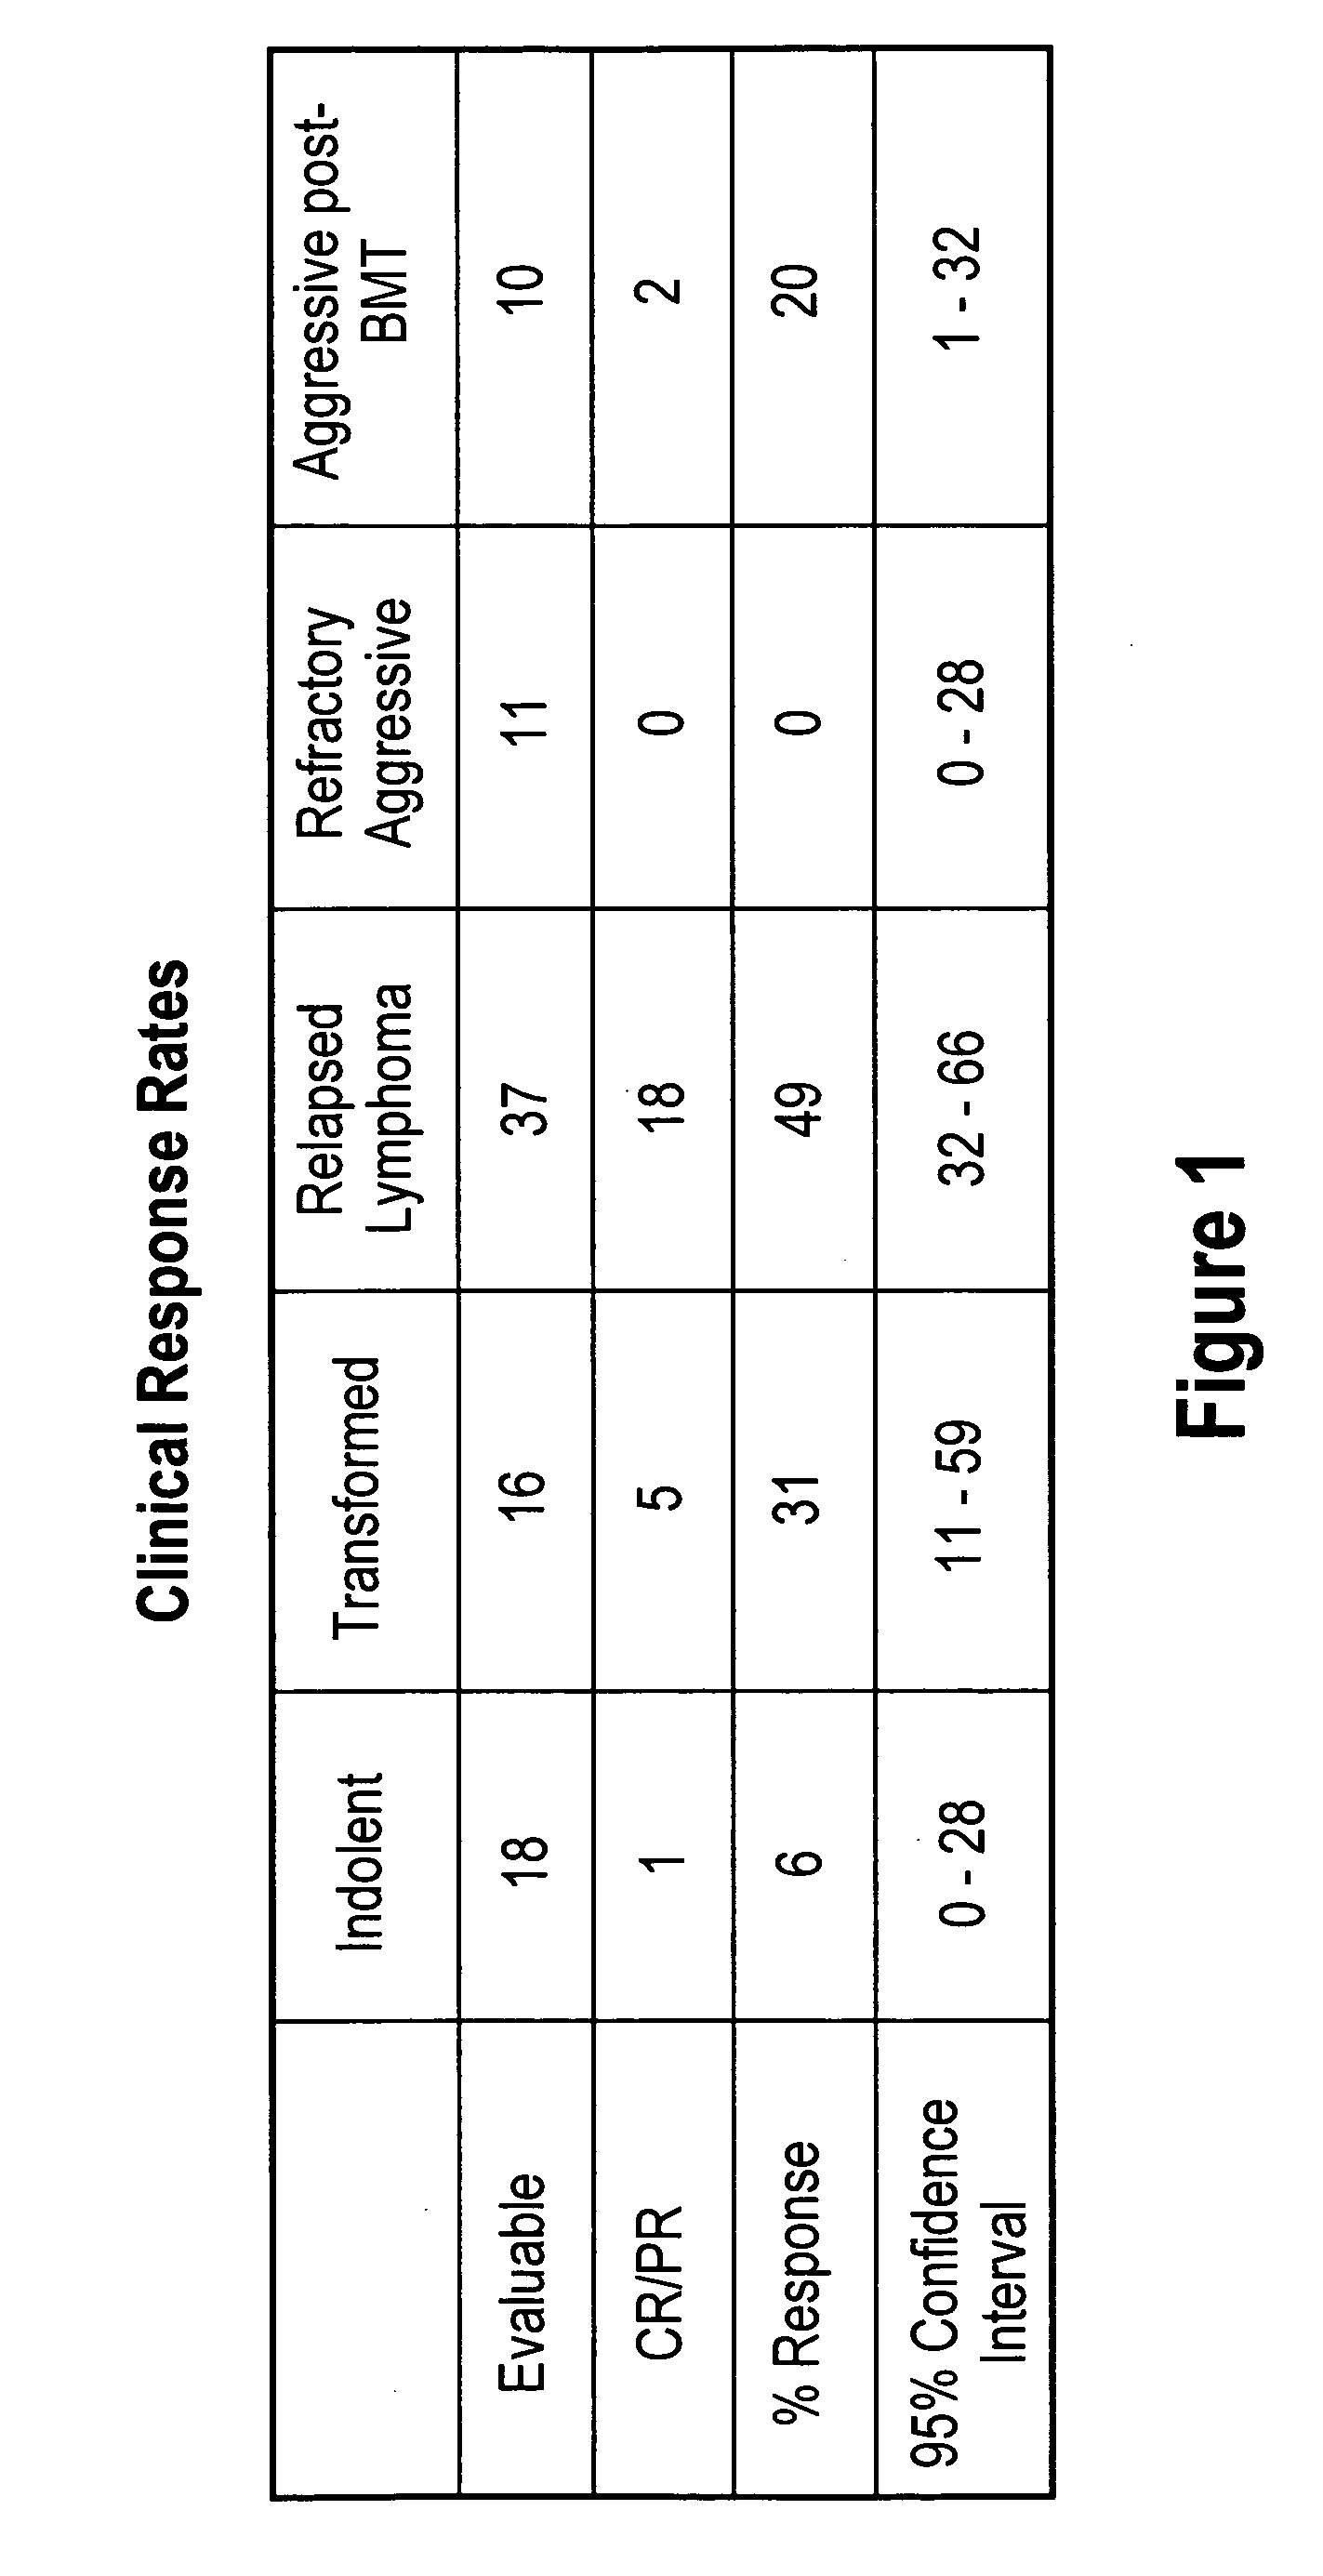 Compositions and methods for treating lymphoma